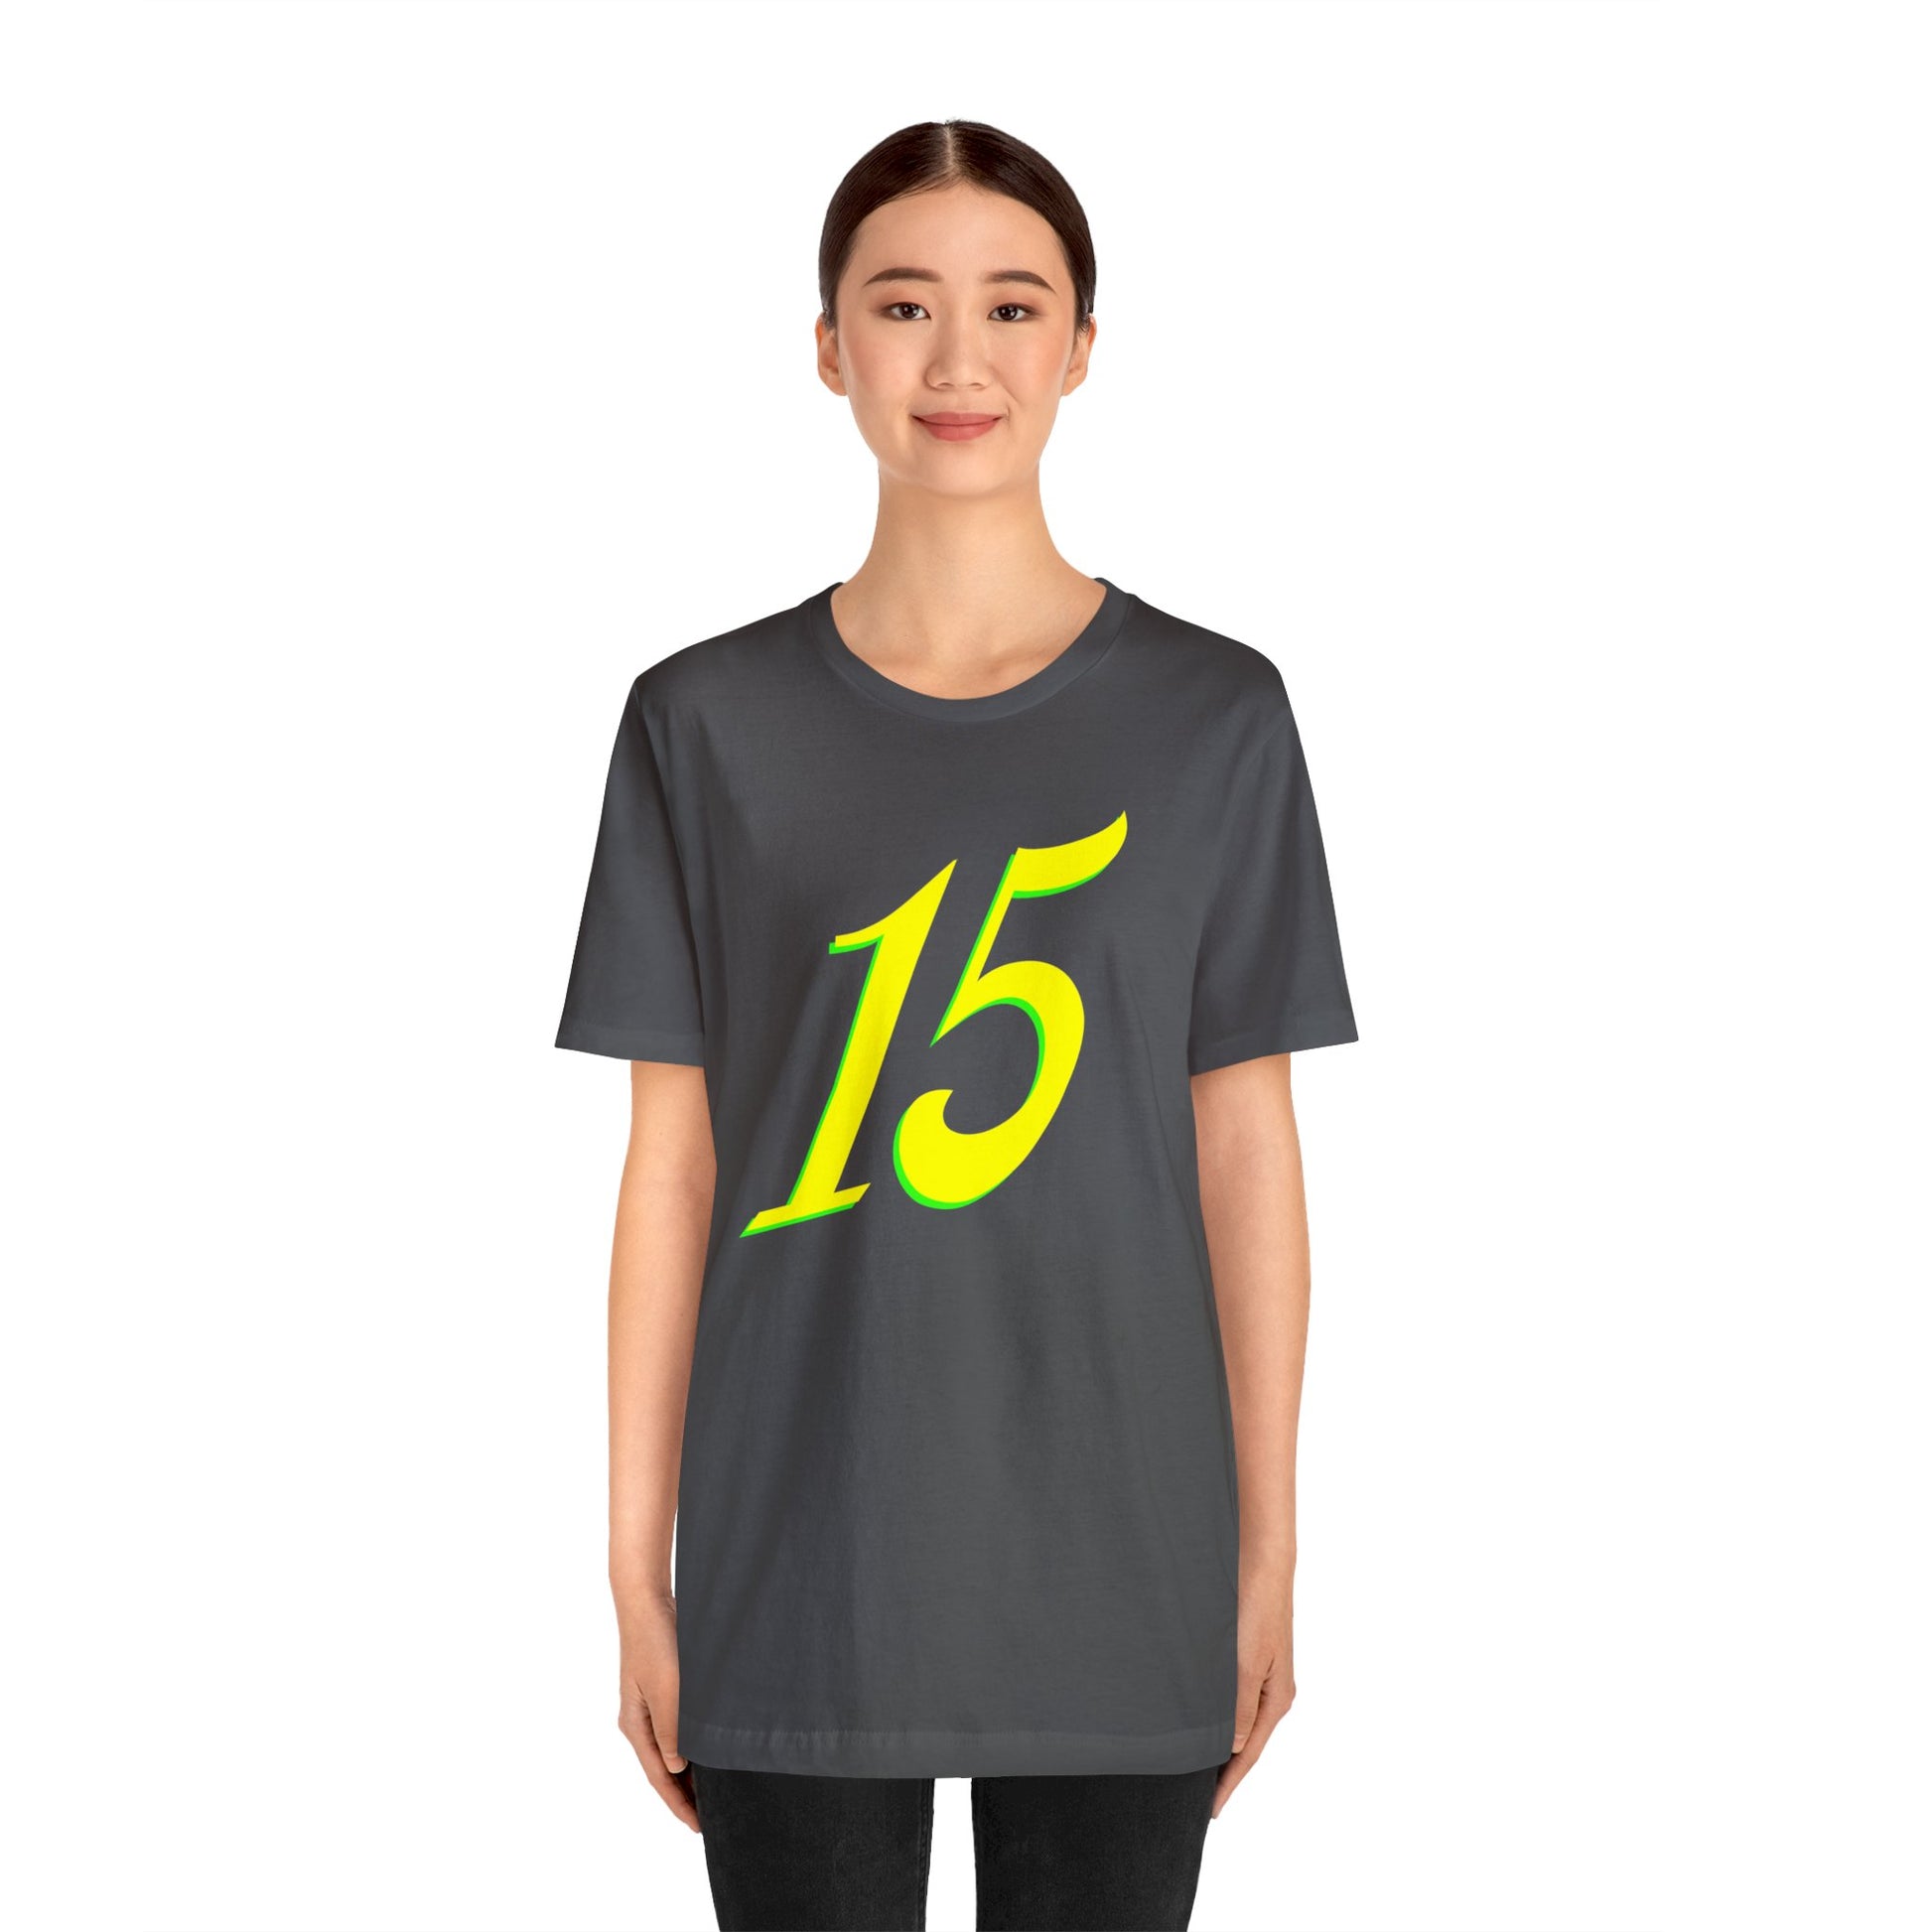 Number 15 Design - Soft Cotton Tee for birthdays and celebrations, Gift for friends and family, Multiple Options by clothezy.com in Black Size Medium - Buy Now